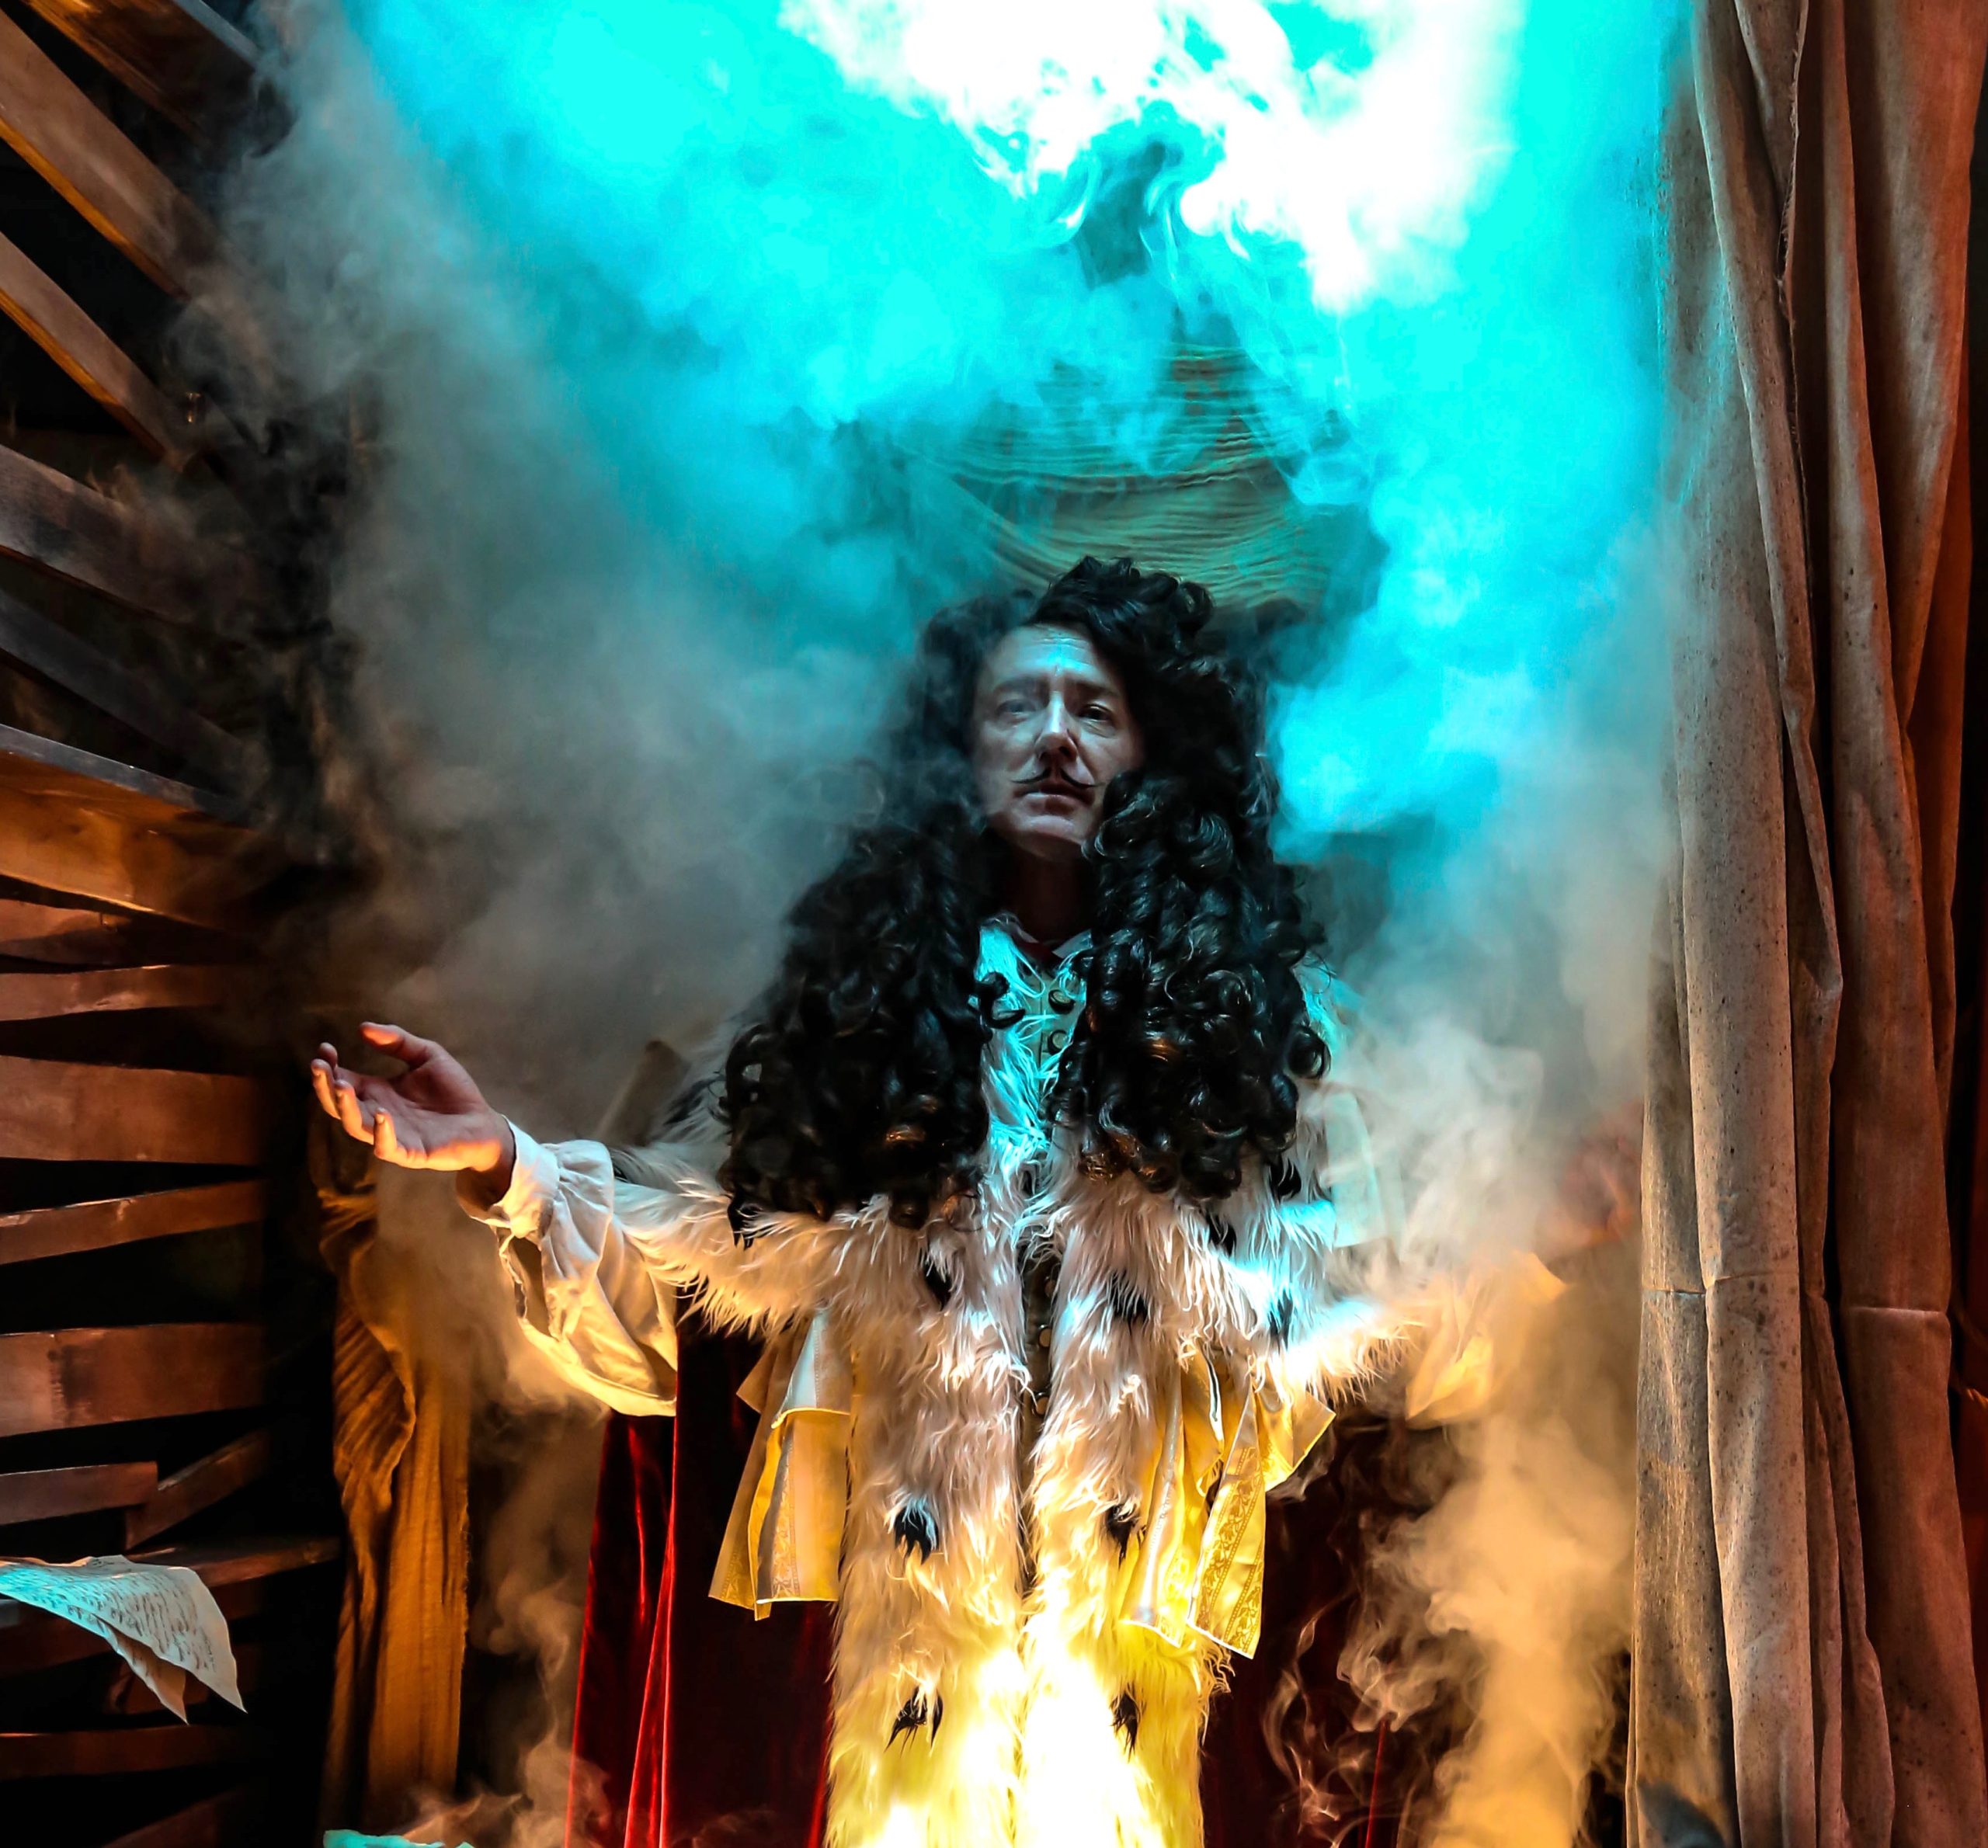 Wait for it. Amid mayhem, his solar majesty Louis XIV materializes. Under the big wig is actor David Whalen.